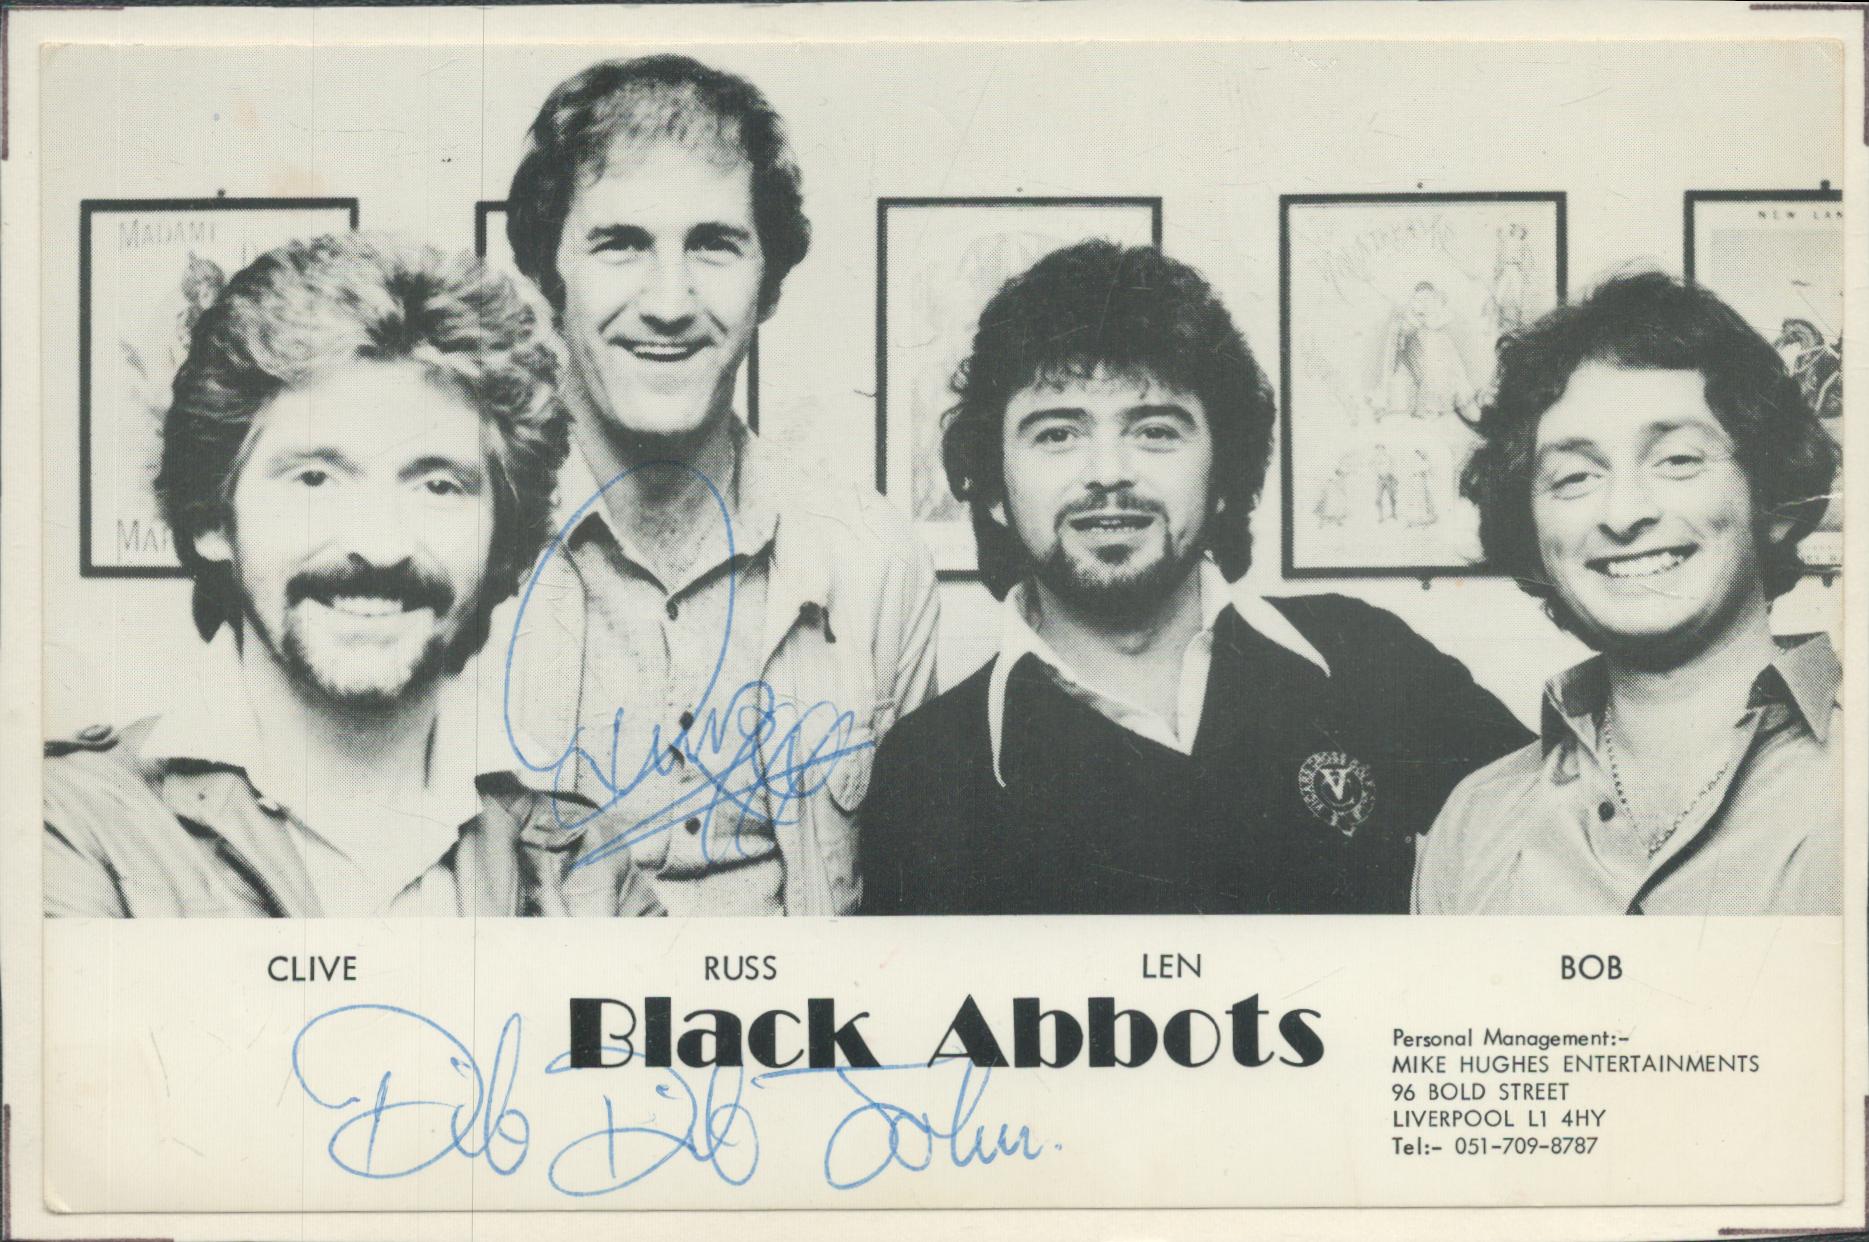 Black Abbotts signed10x8inch black and white photo. Good condition. All autographs are genuine